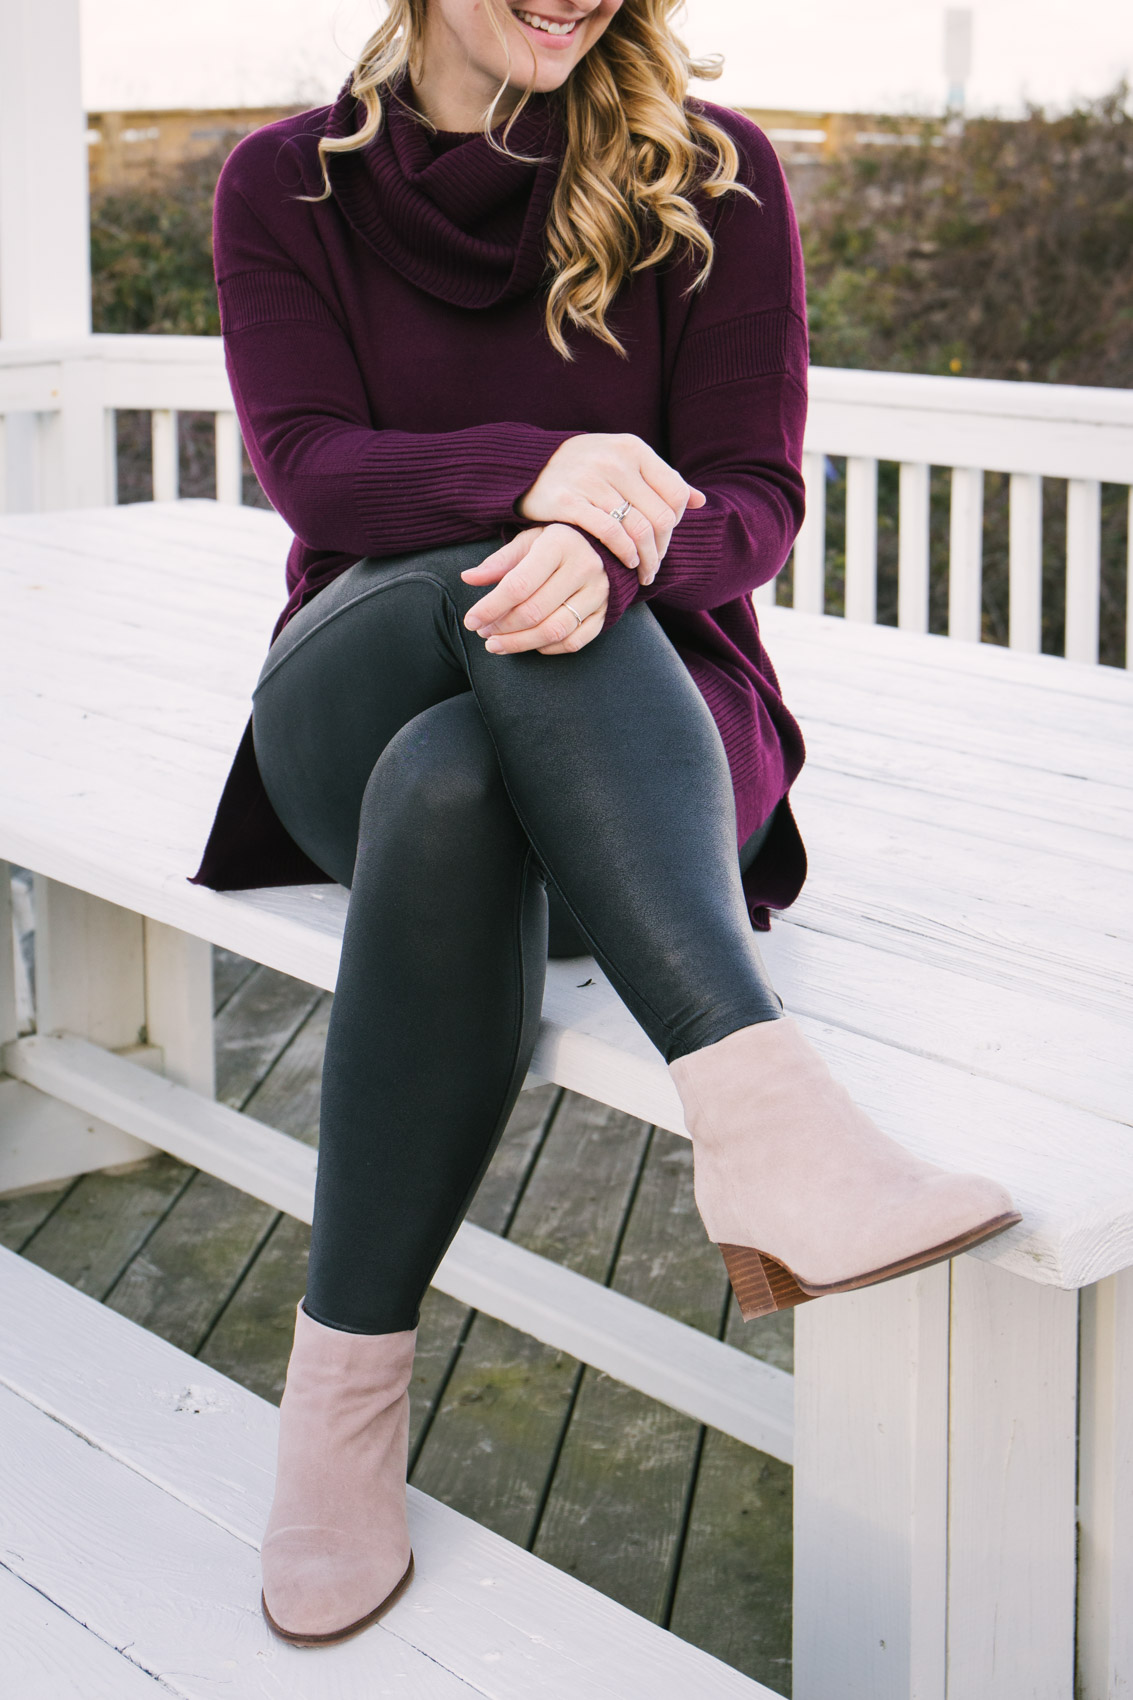 Spanx Faux Leather Leggings Review - Allyn Lewis